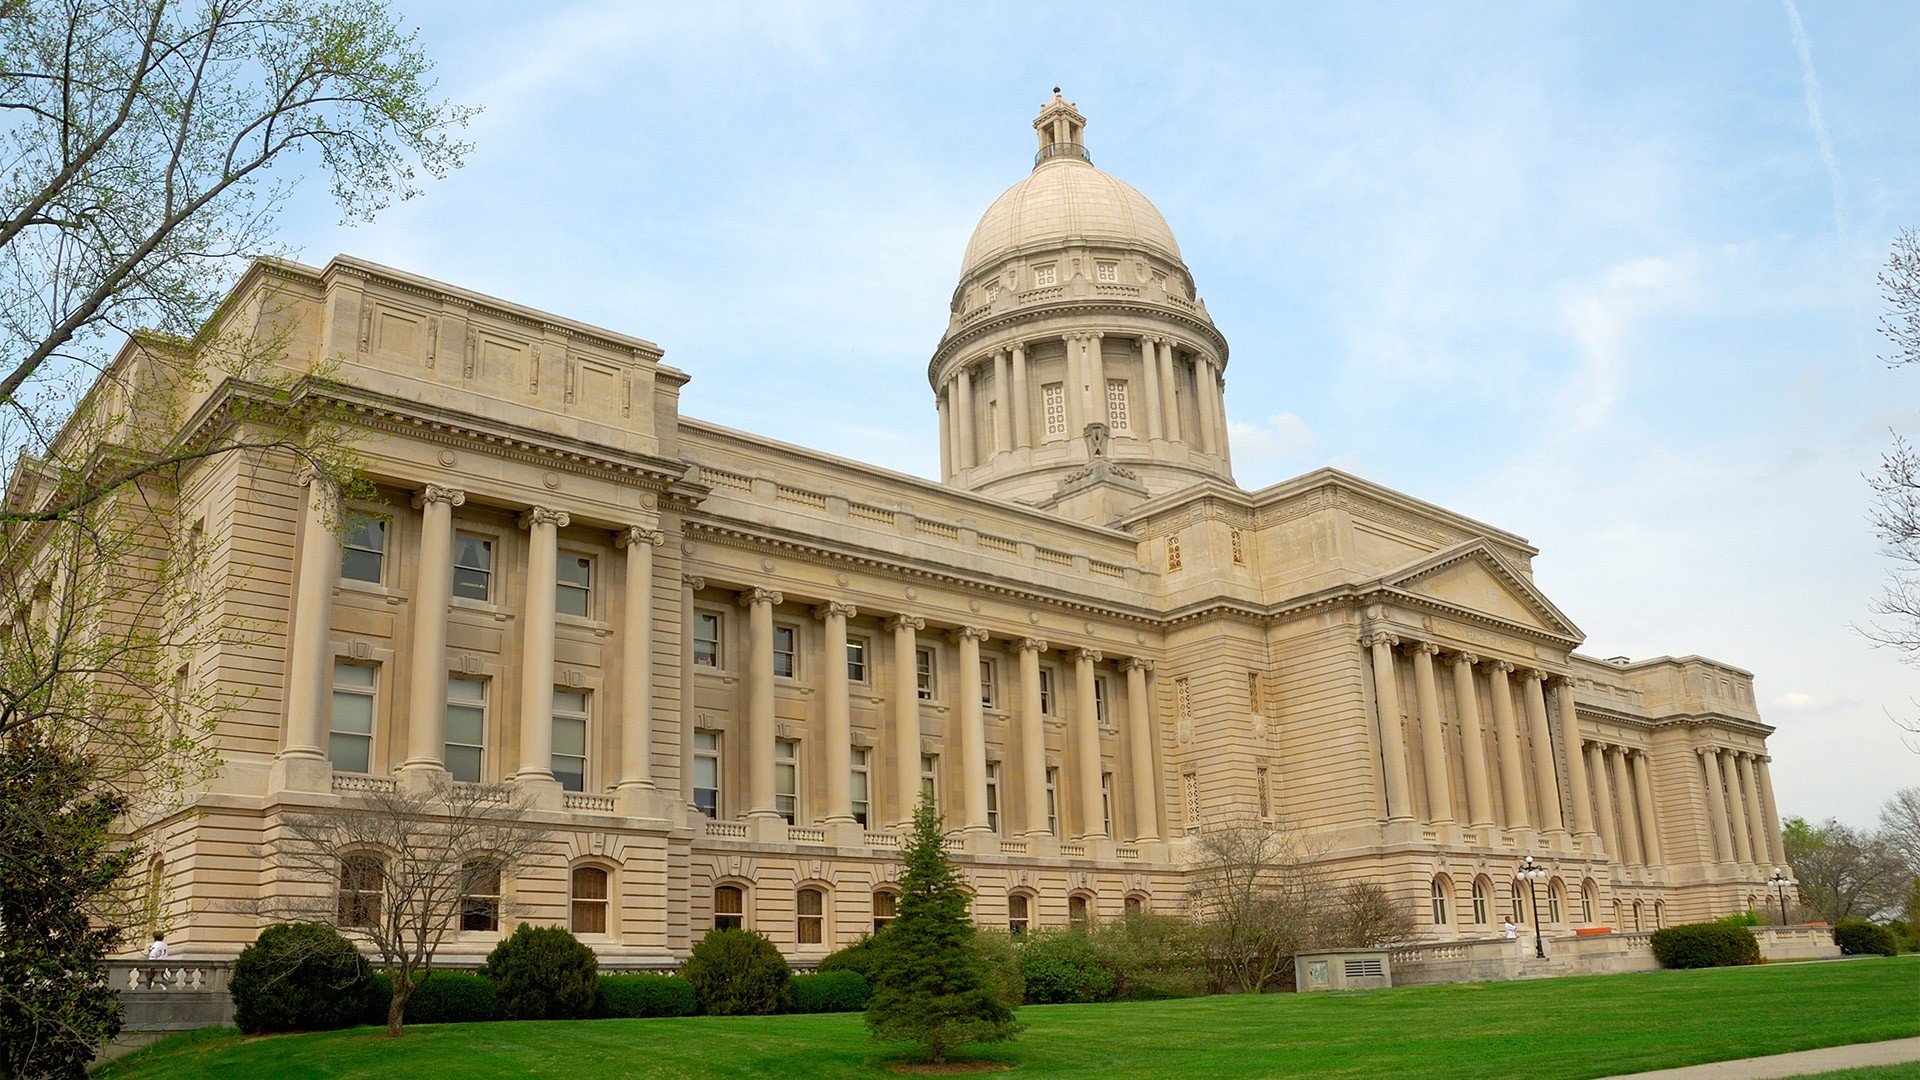 Kentucky lawmakers introduce new bill to legalize sports betting, online poker